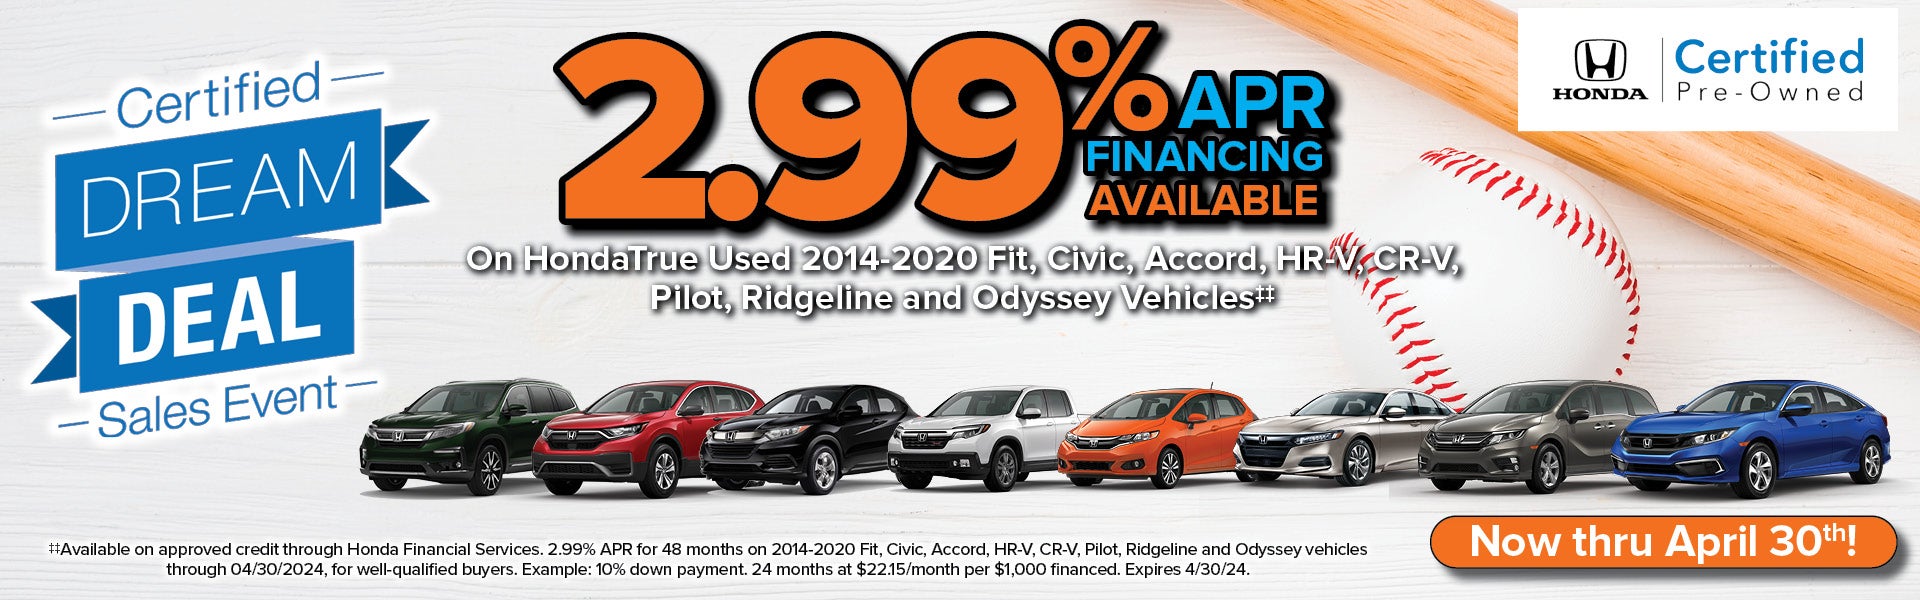 2.99% APR Financing Available